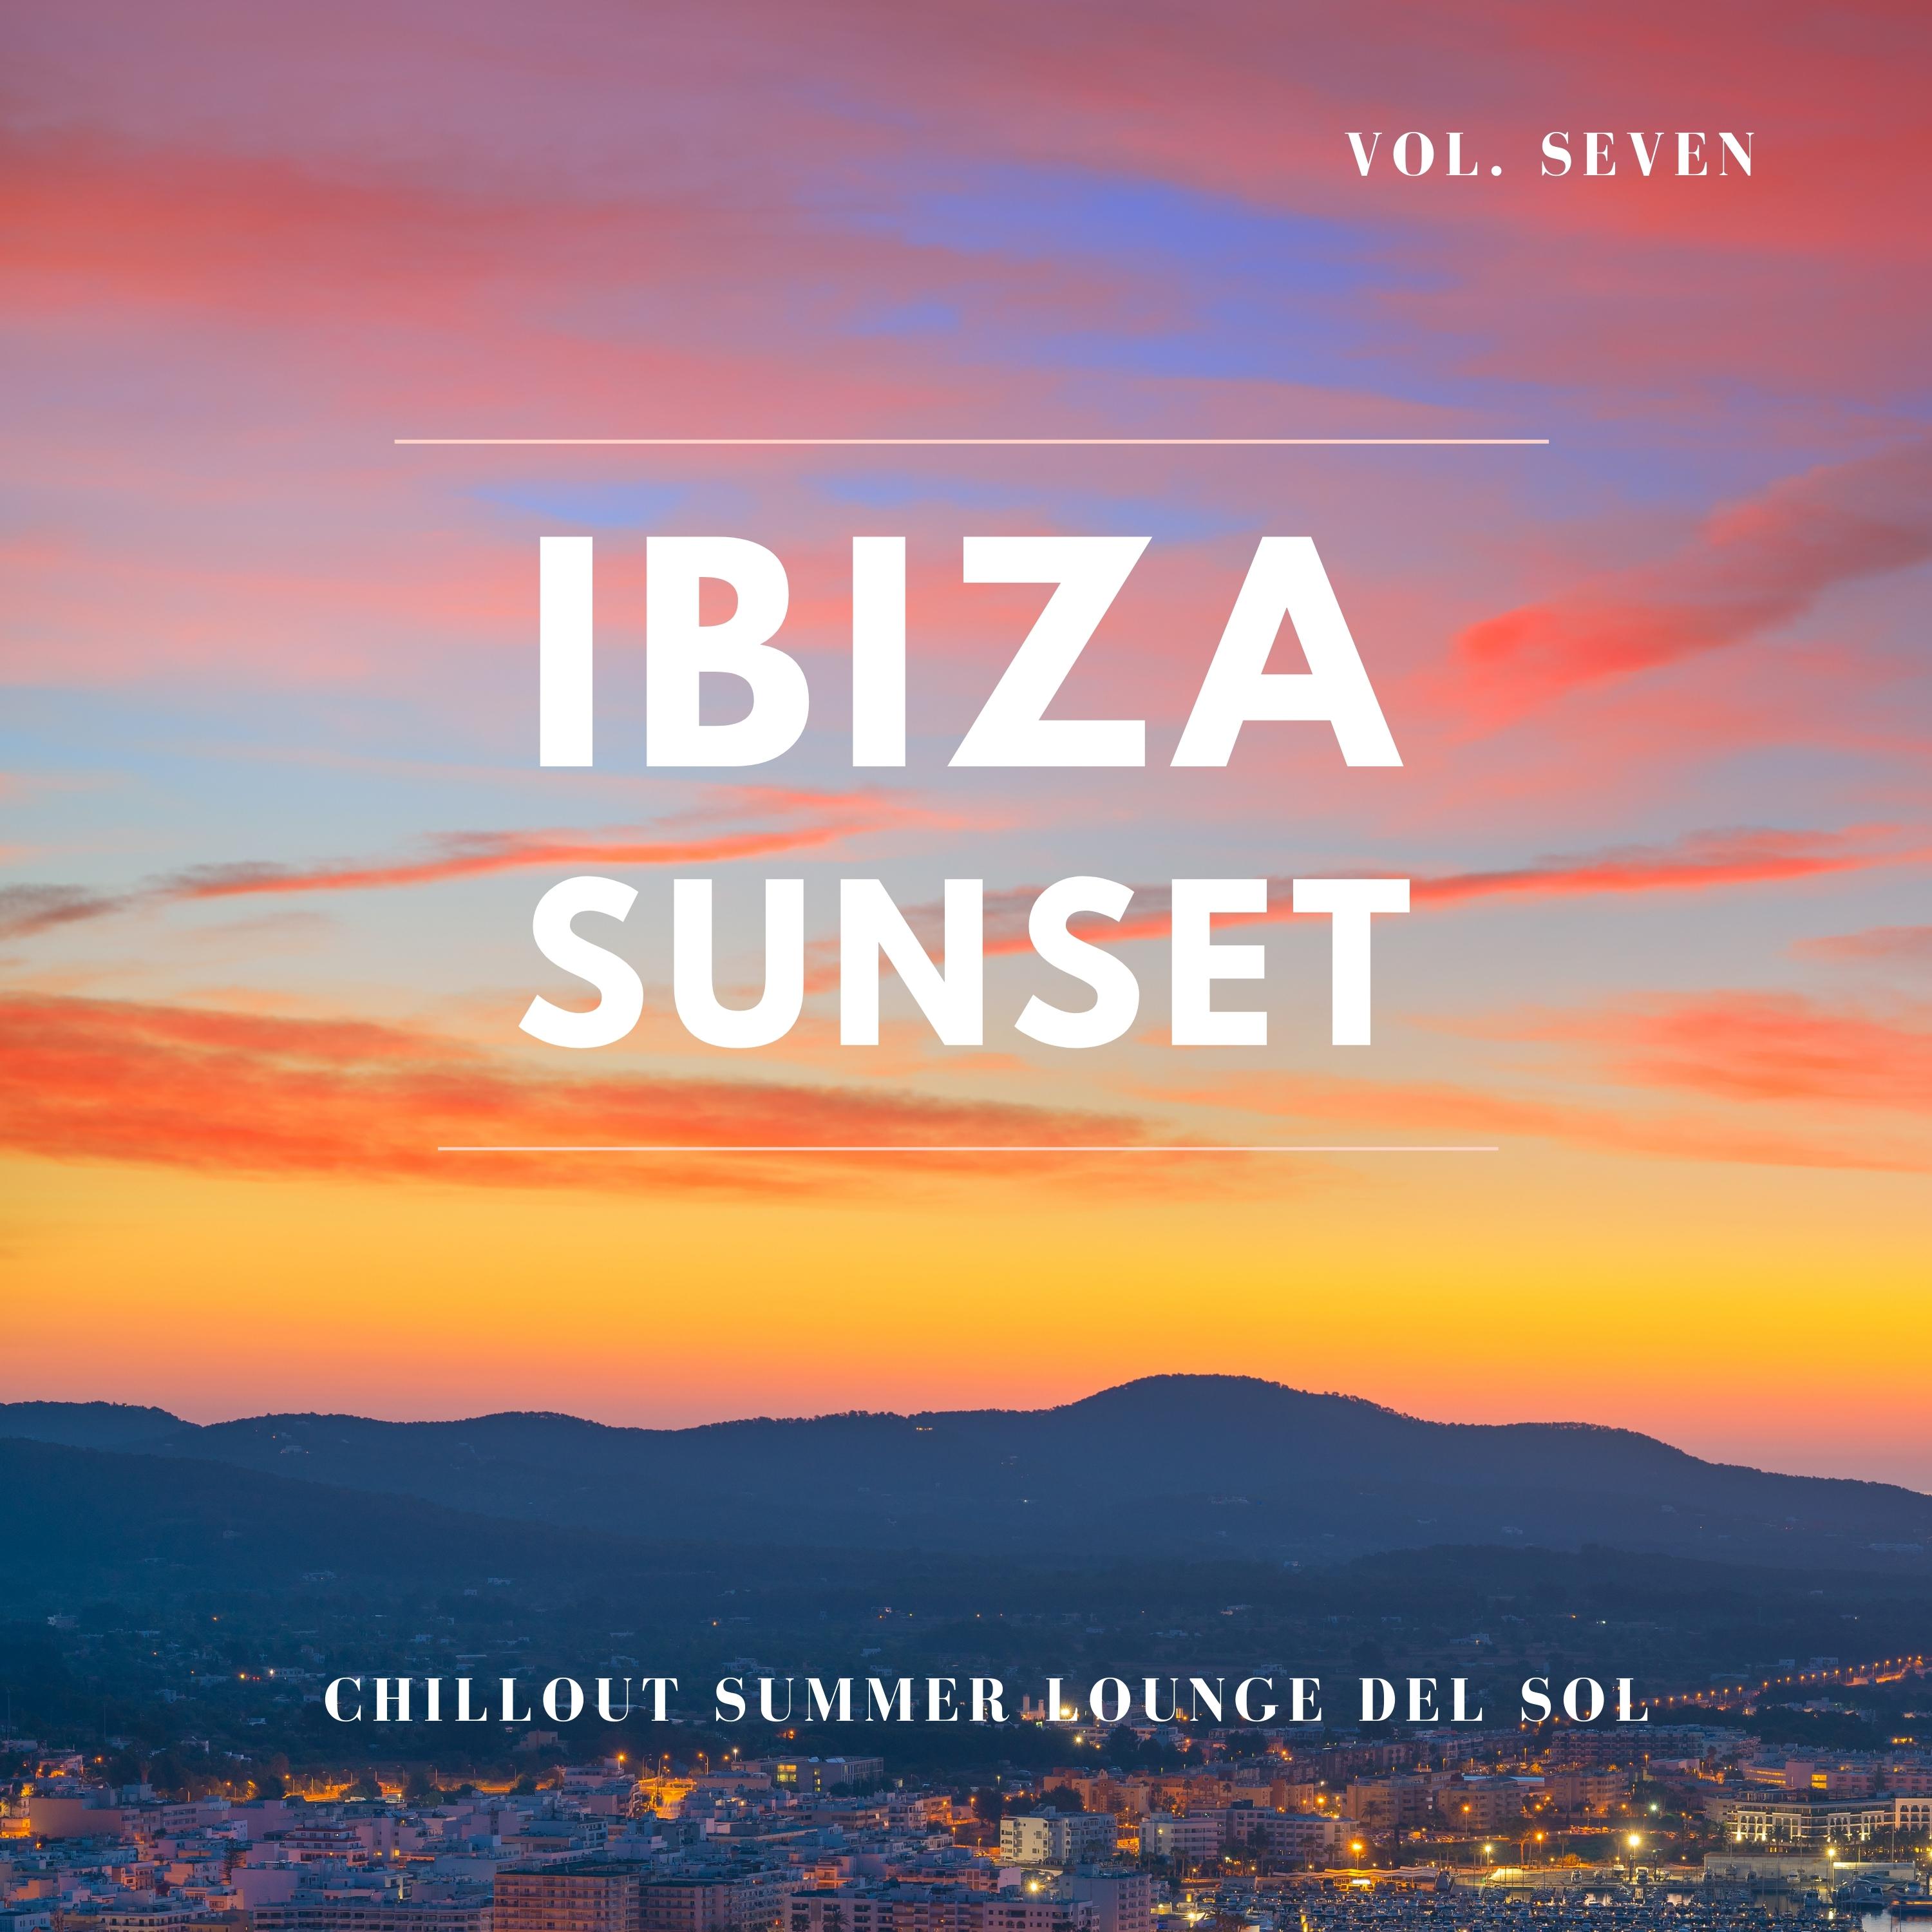 Ibiza Sunset Vol.2. End of Summer Soleil Fisher. 7 chill